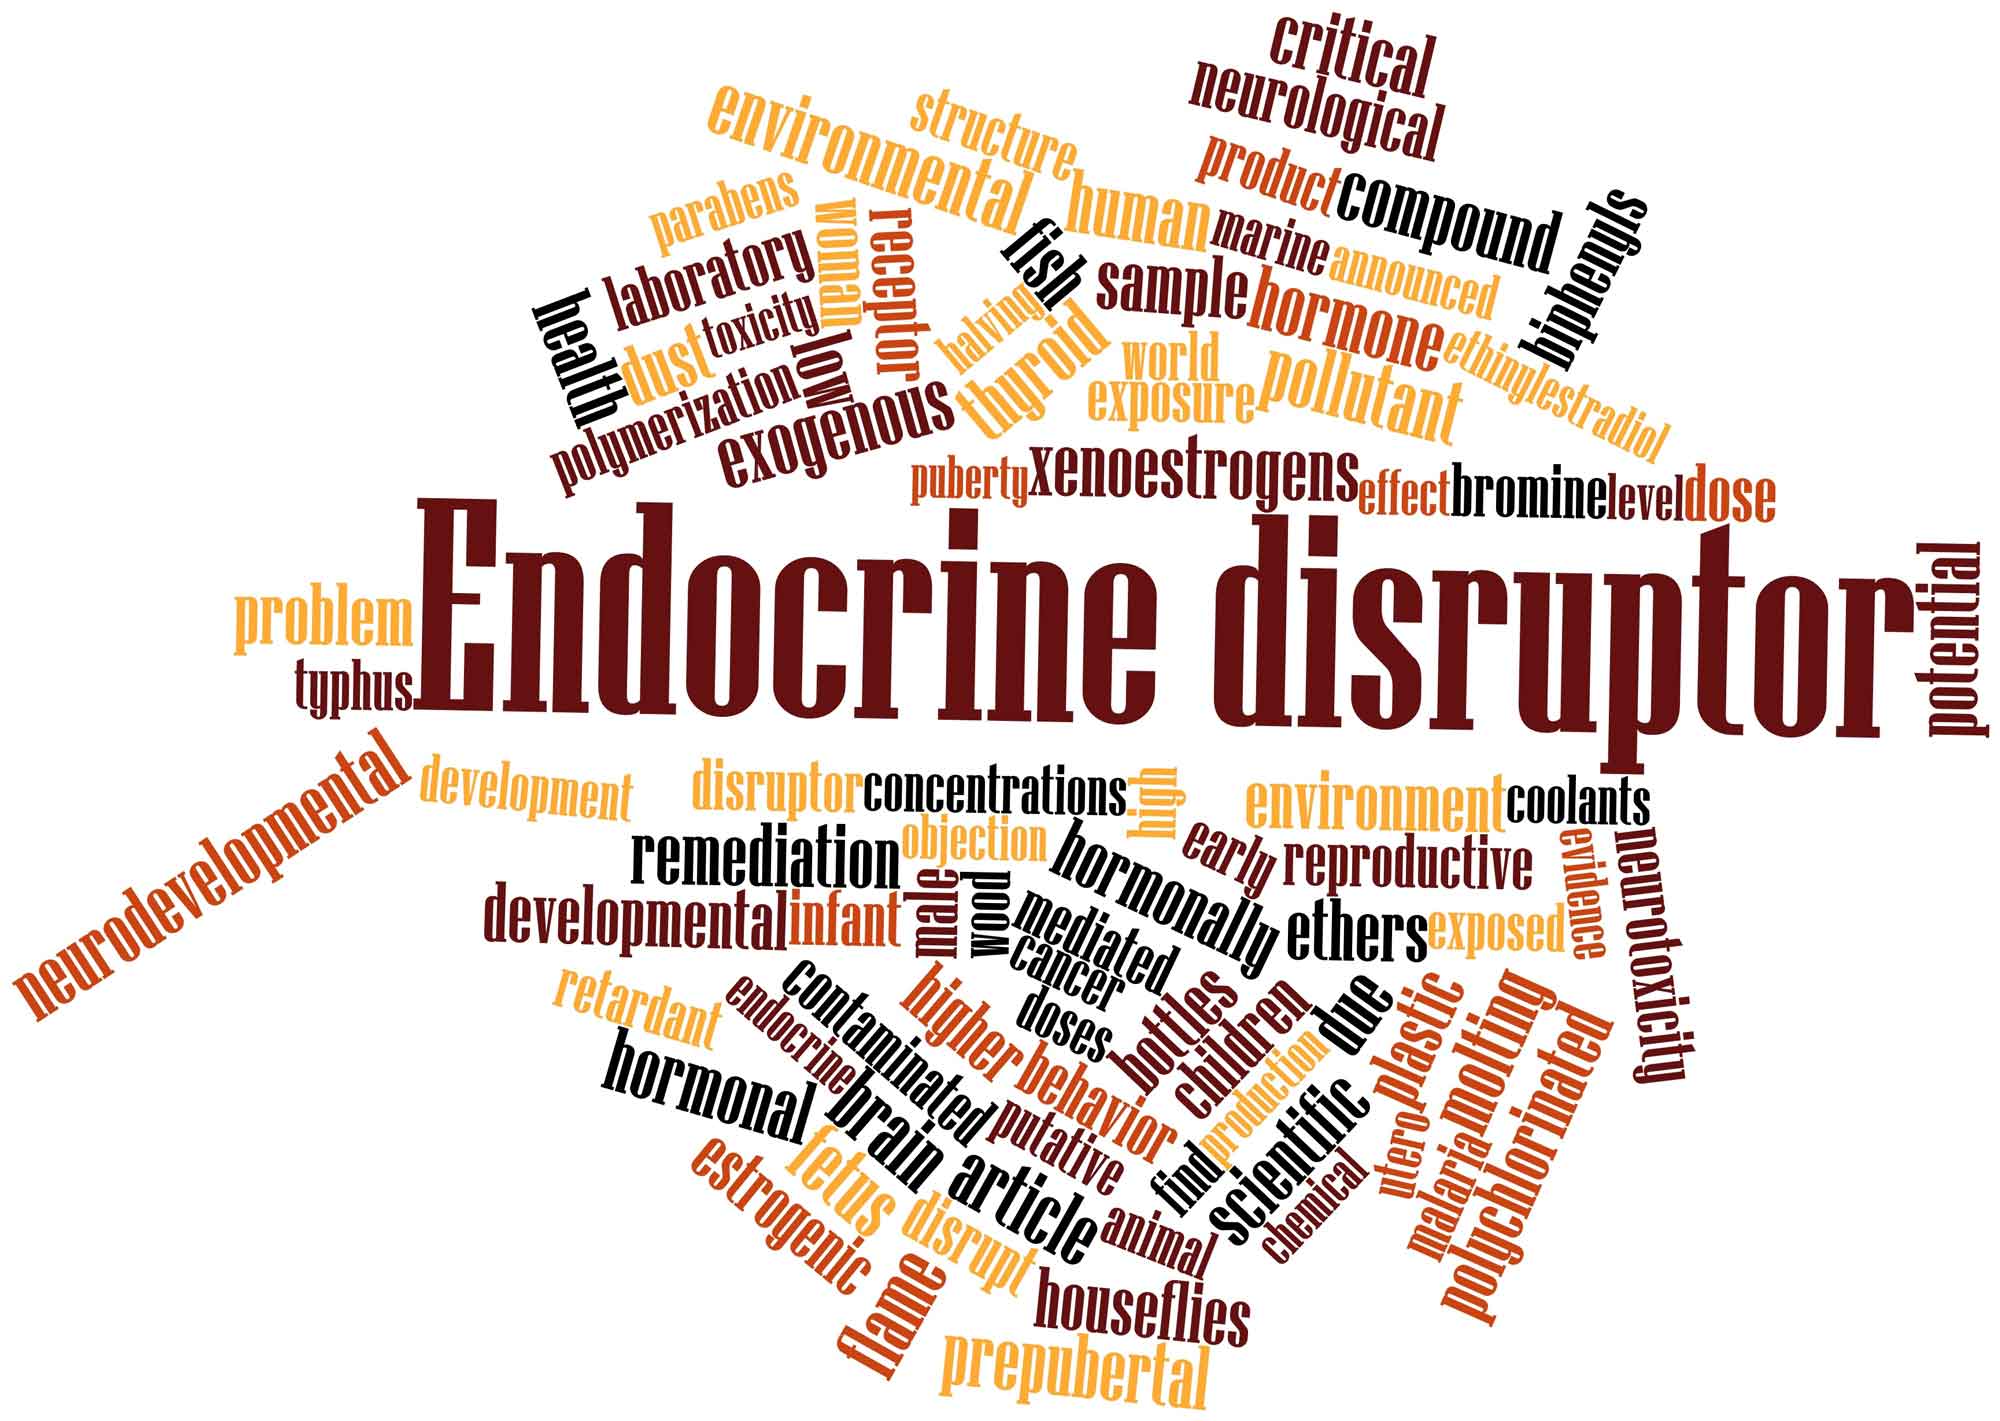 Endocrine Disruptors | What Are They and Why They Matter